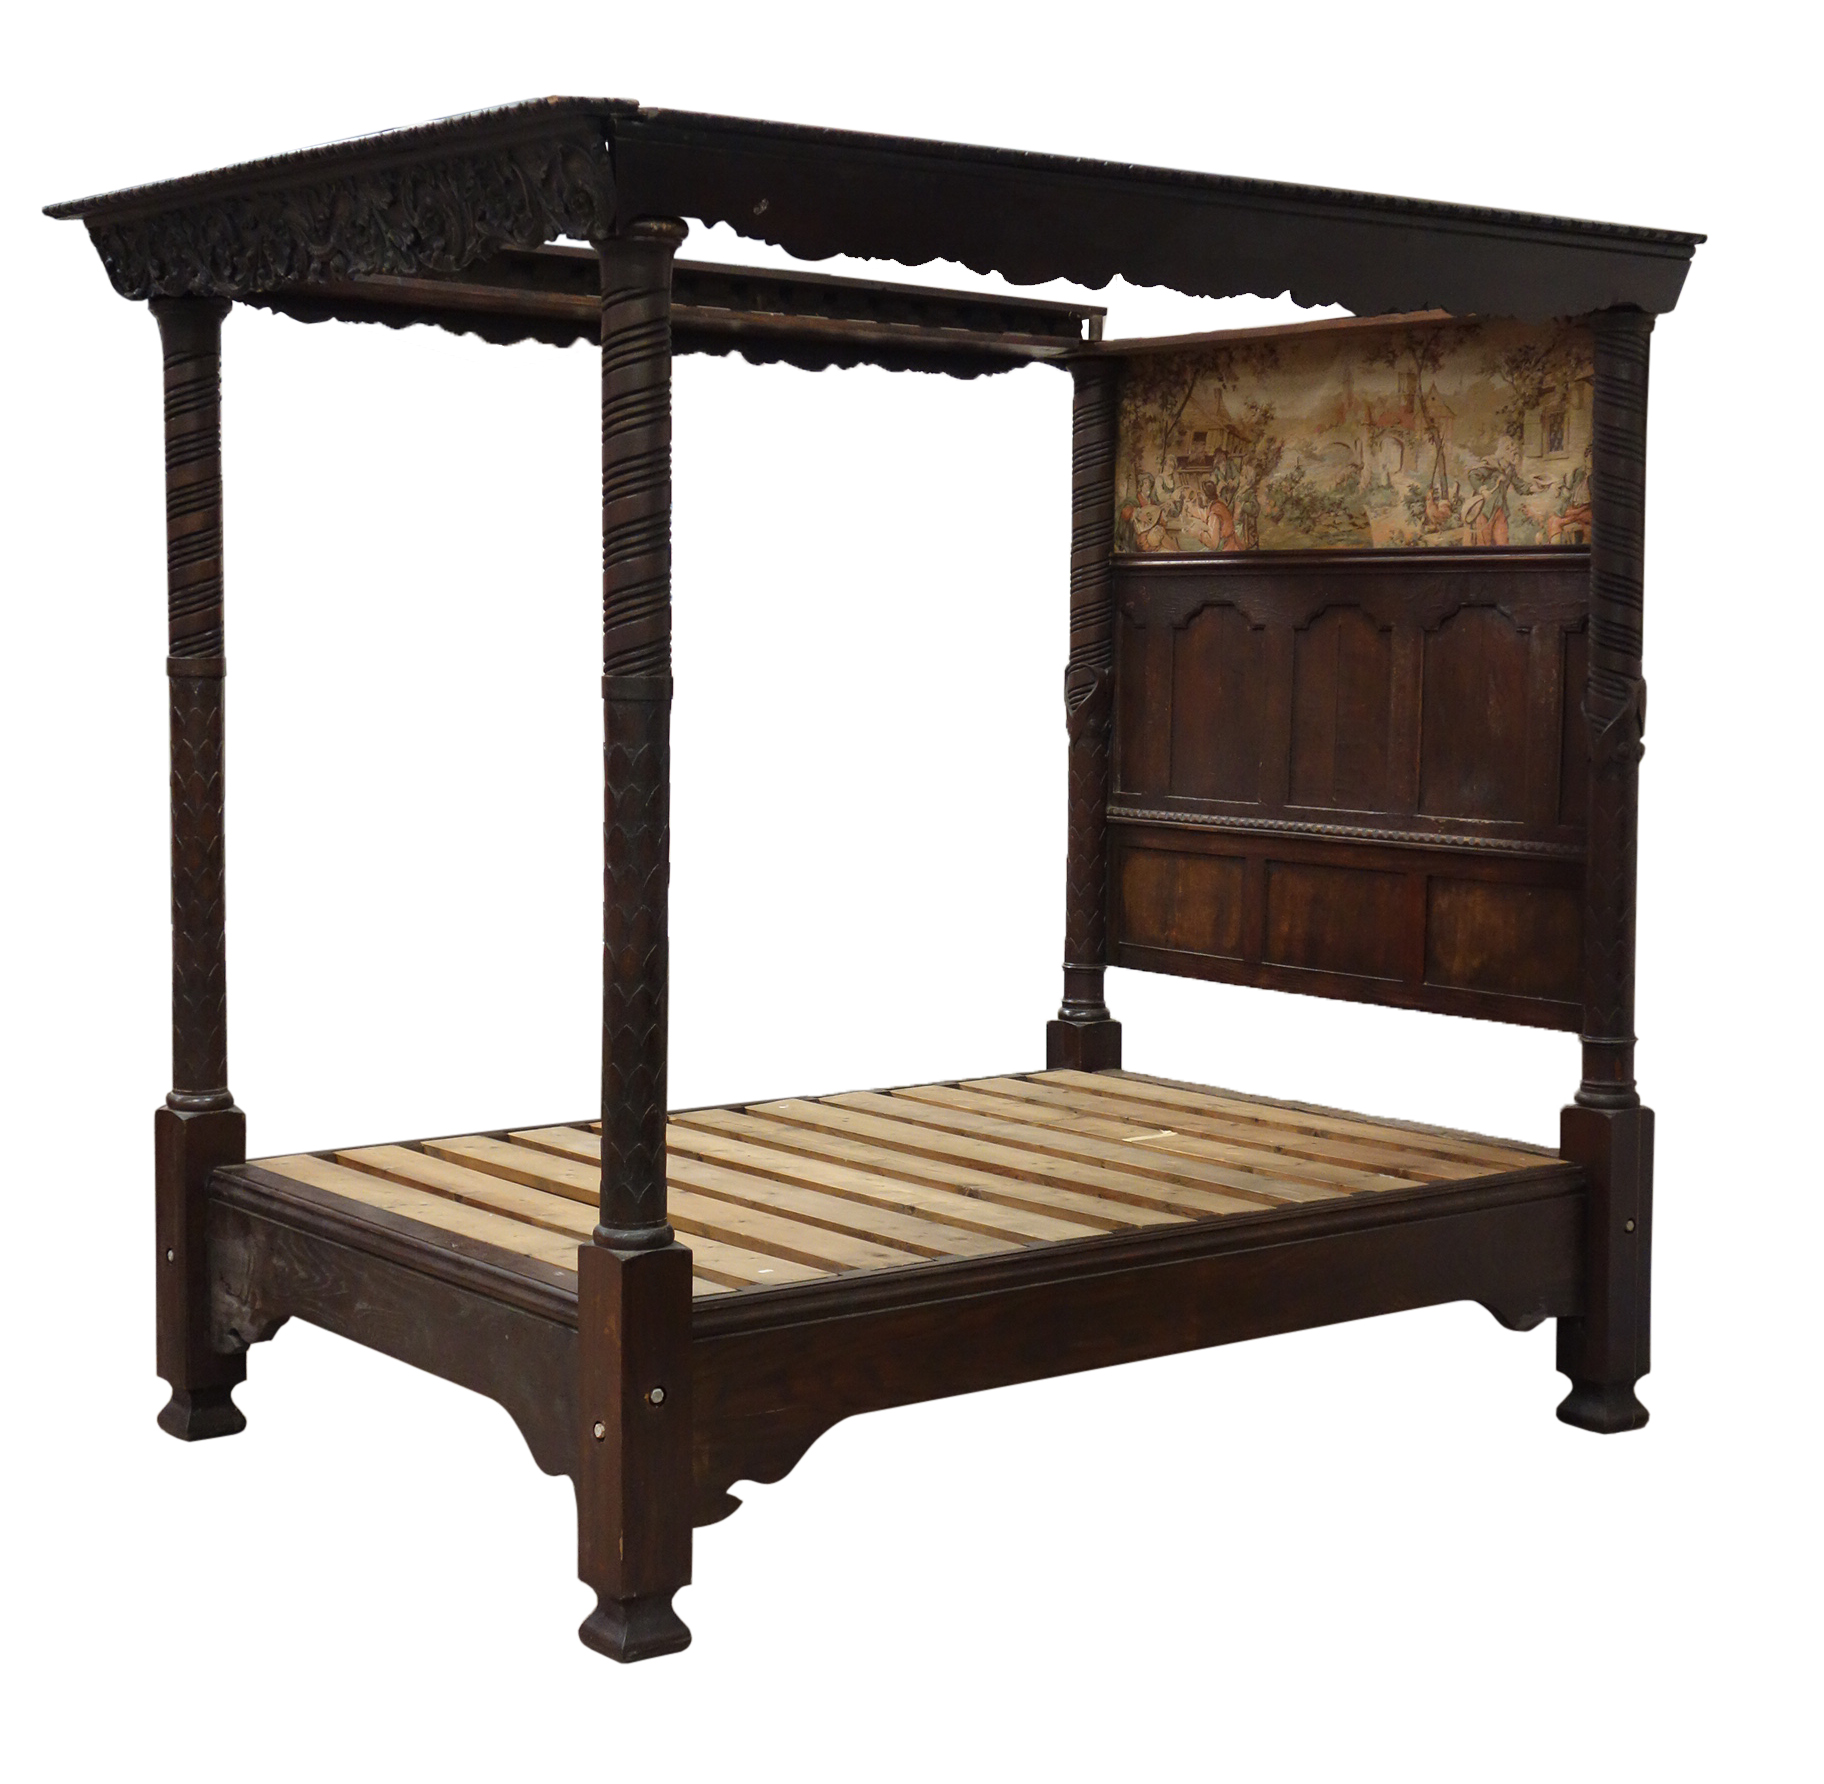 19th century and later four poster 5' bed, fielded panel back with tapestry hanging,